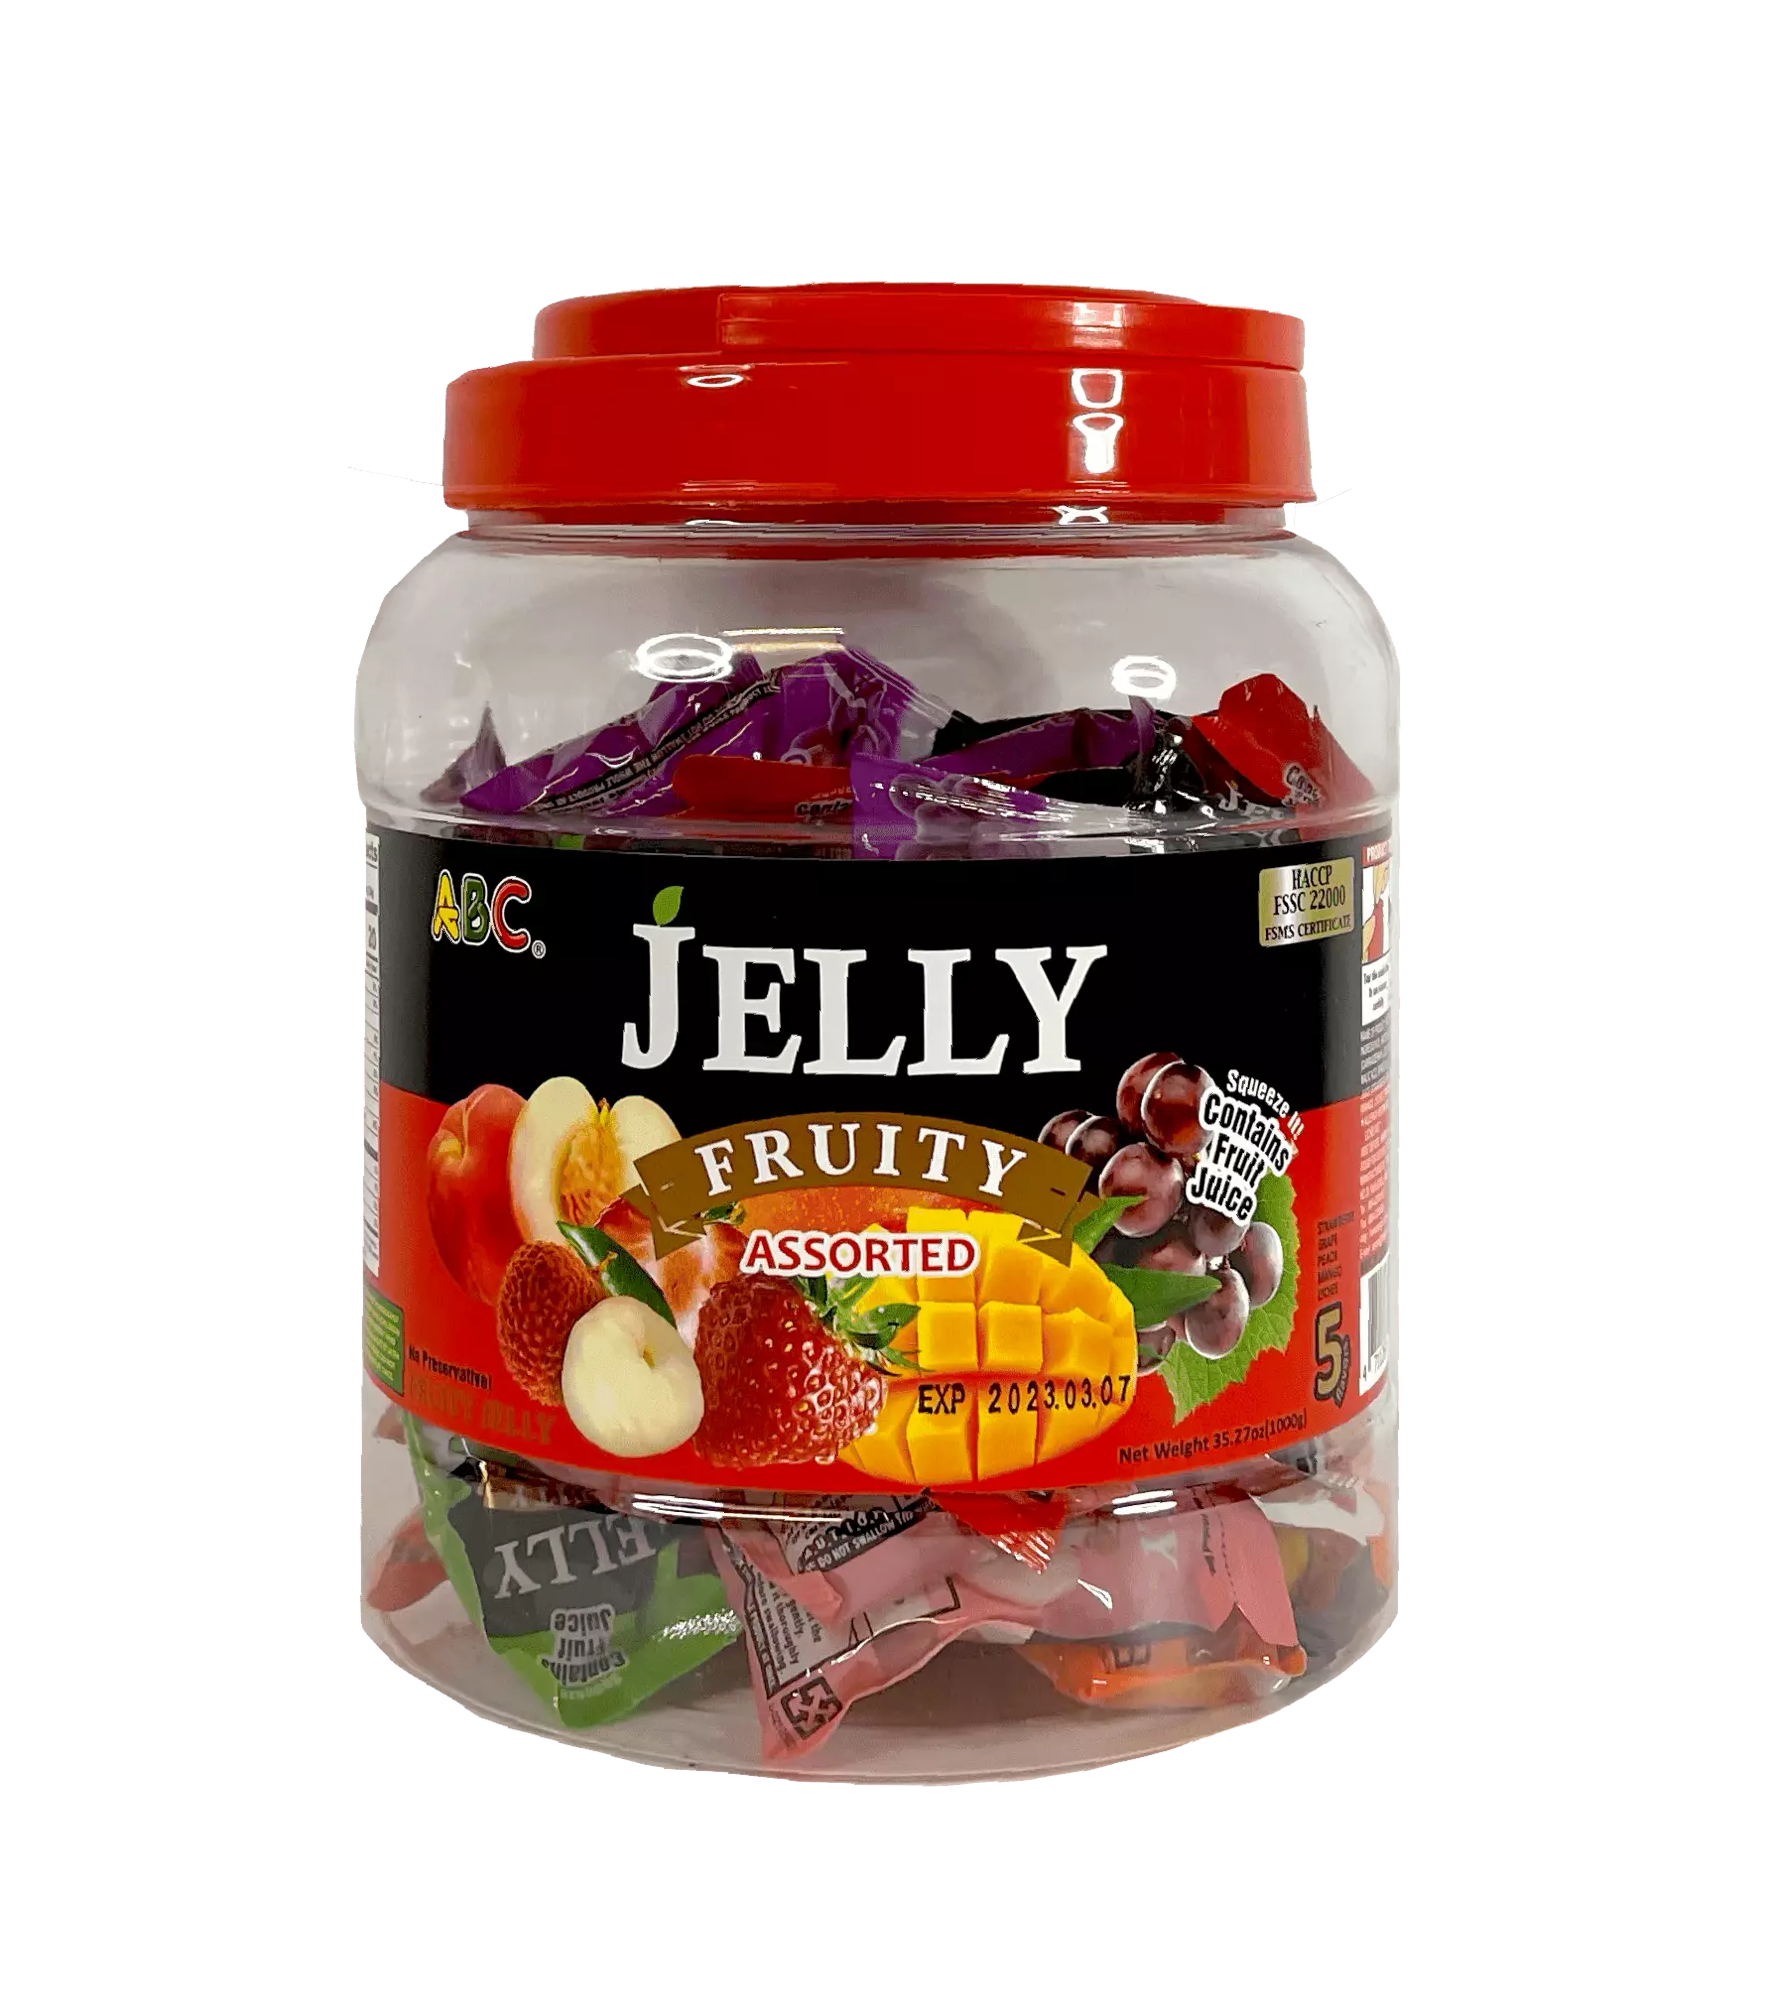 Jelly Assorted 1kg ABC Taiwan